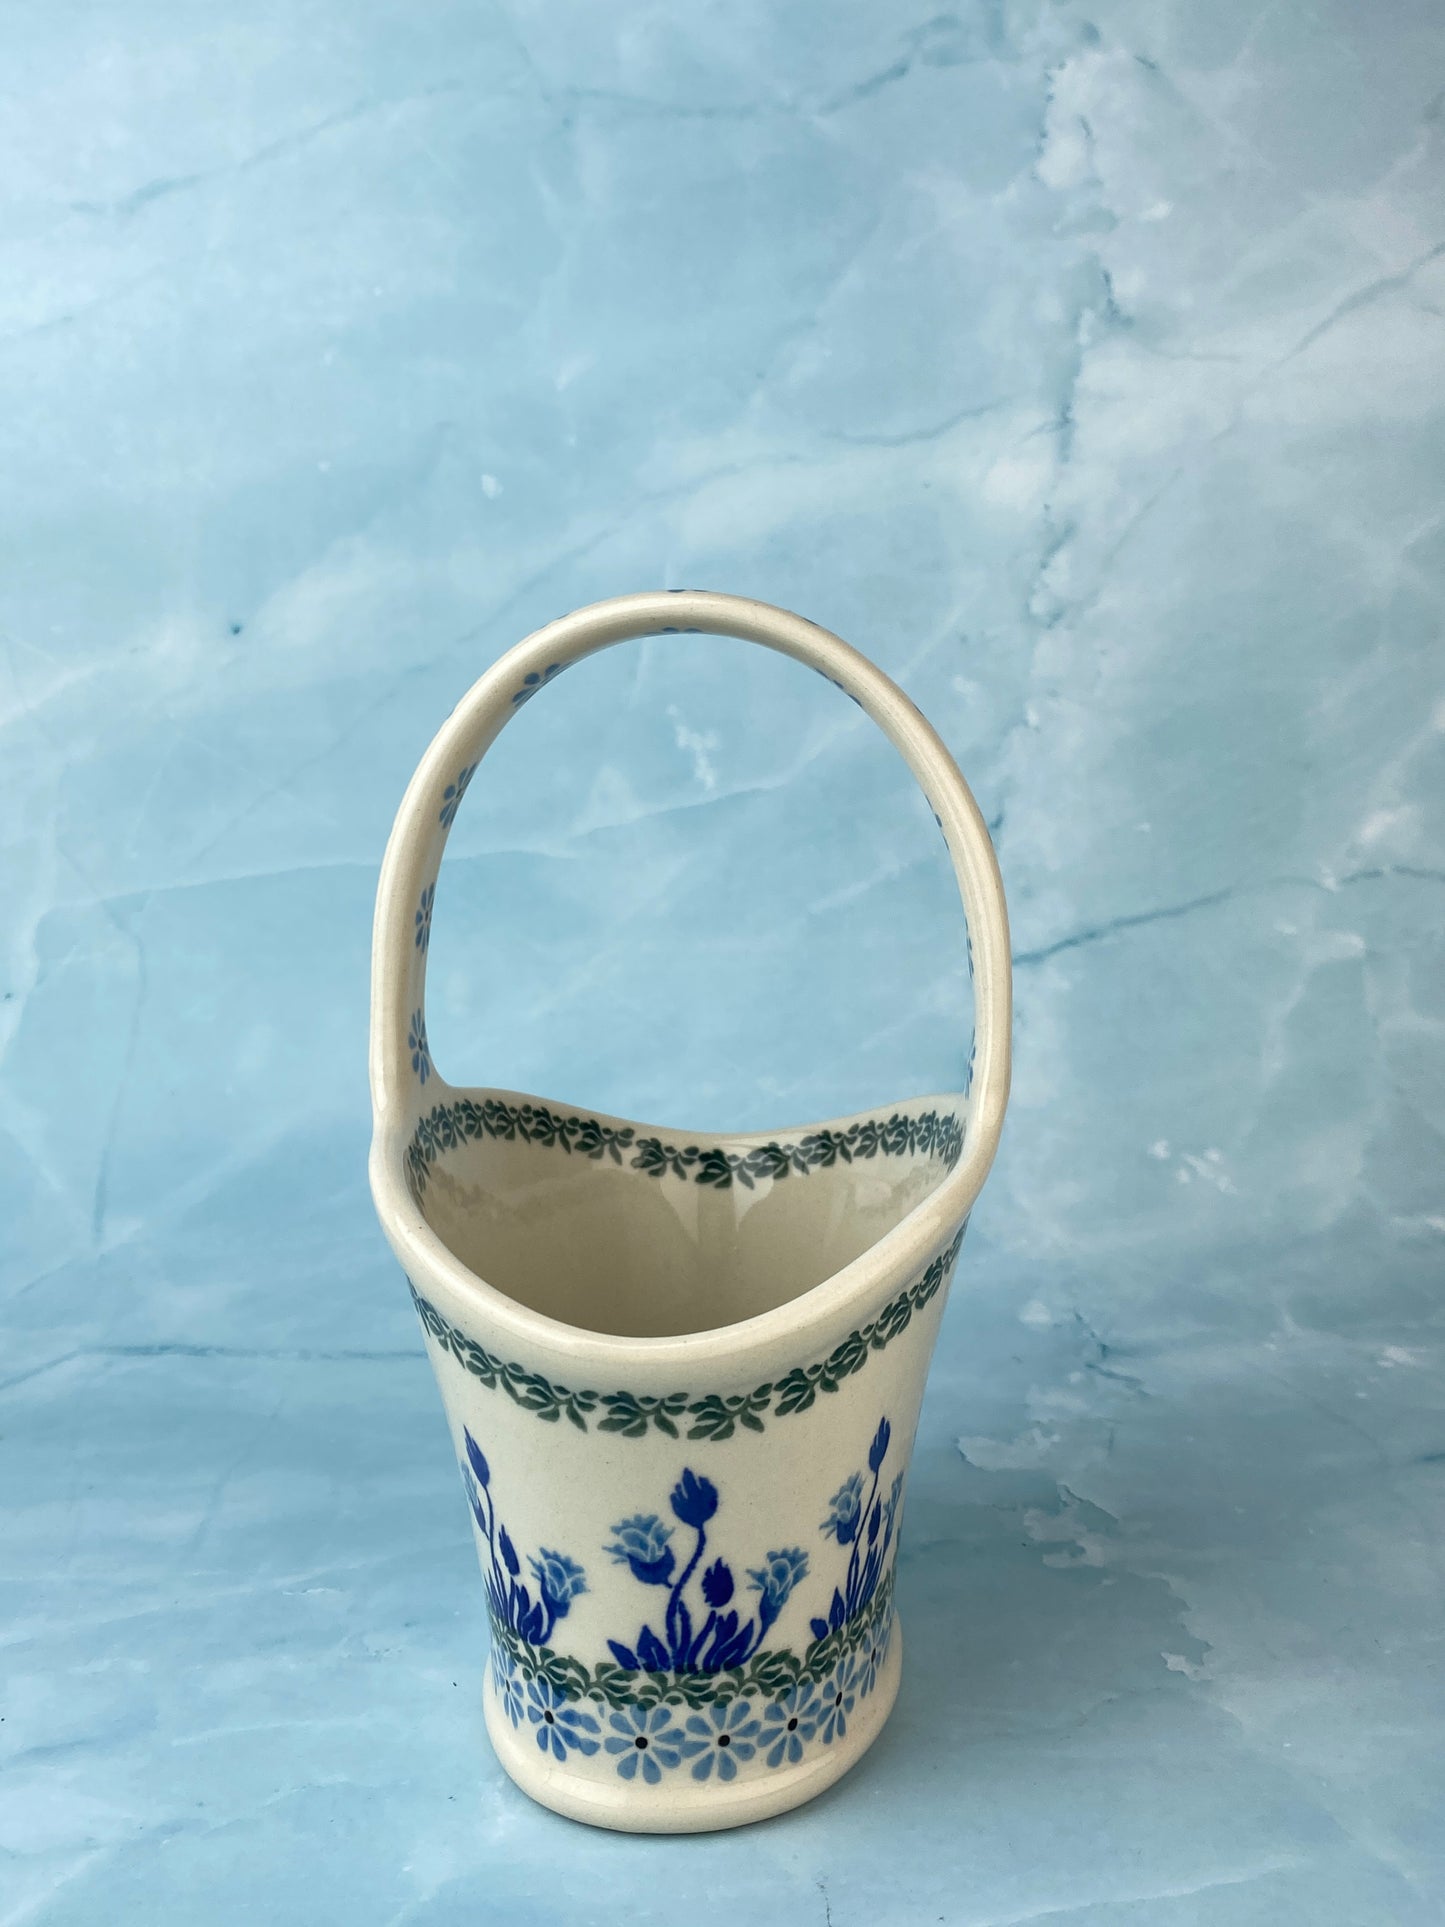 Basket with Handle - Shape A30 - Pattern 1937